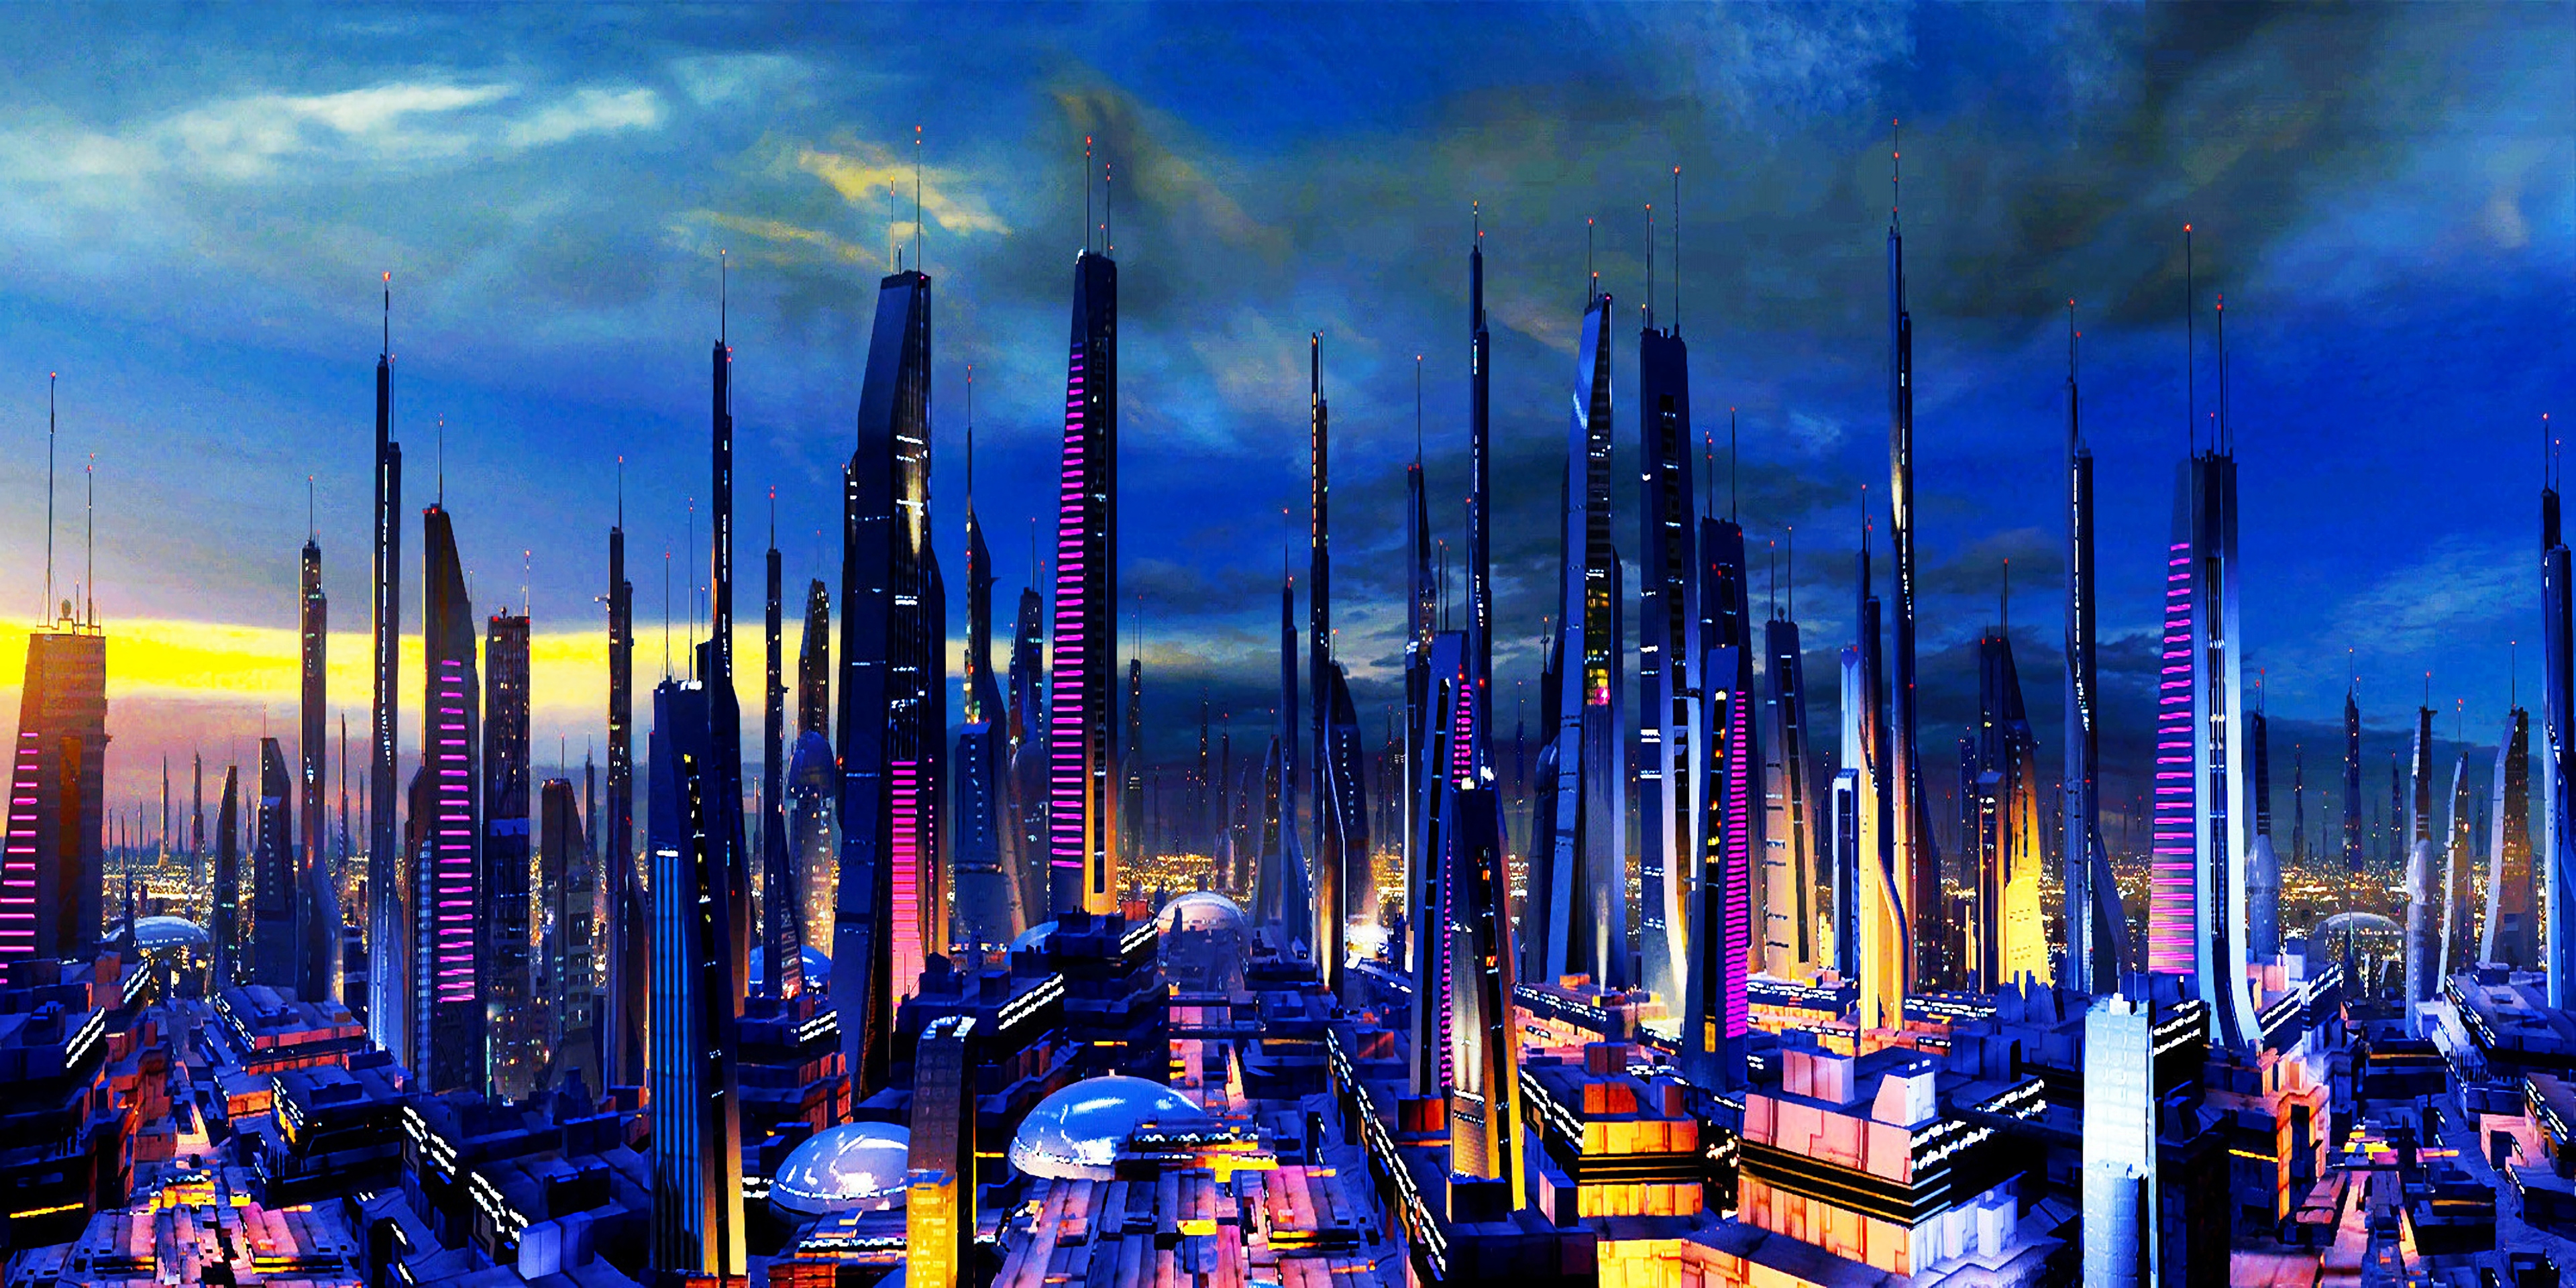 City Futuristic Wallpaper,Hd Artist Wallpapers,4K Wallpapers,Images